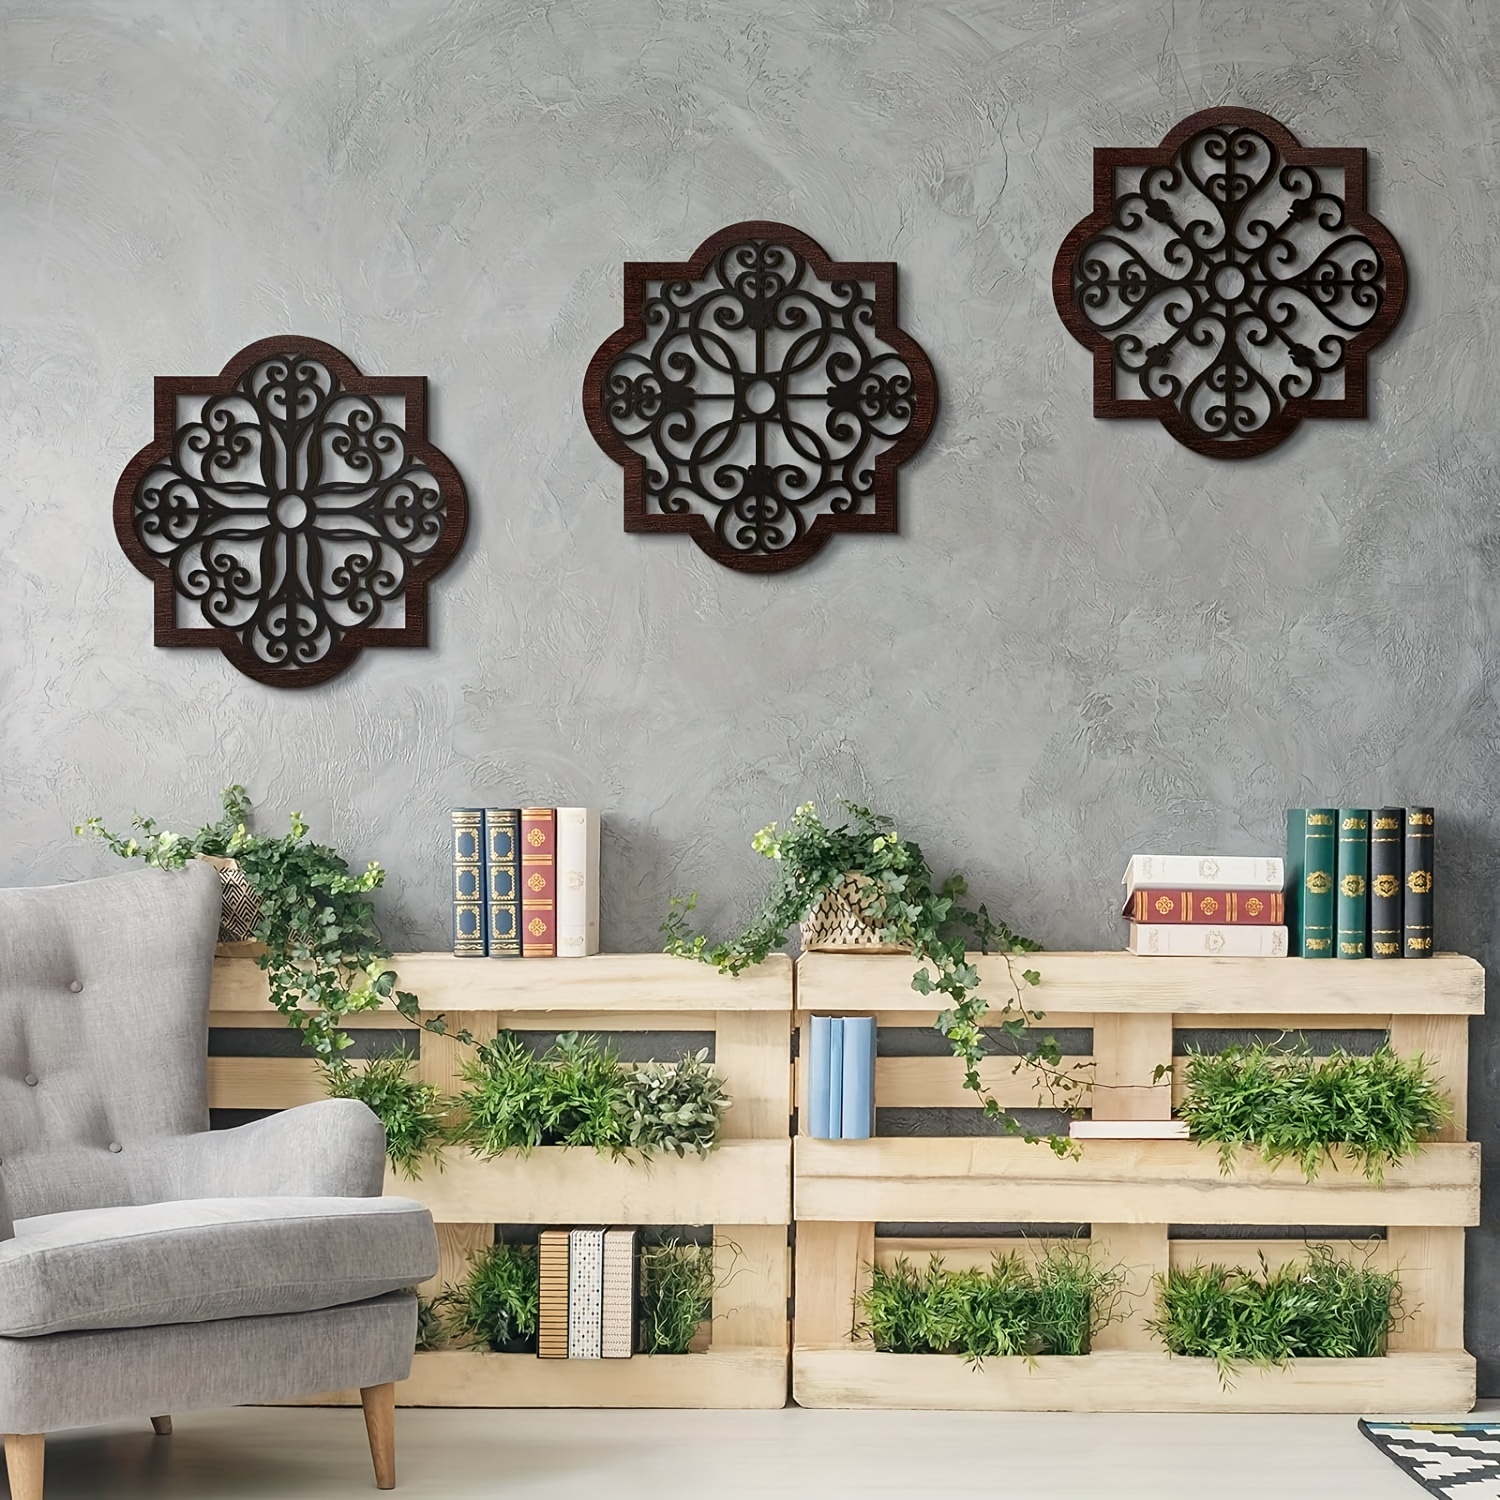 

3pcs Rustic Wood Wall Decor Modern Farmhouse Geometric Decor Wall Art Farmhouse Hanging Decoration For Living Room Bedroom Home Indoor Outdoor Office, 12 X 12 Inch, Brown